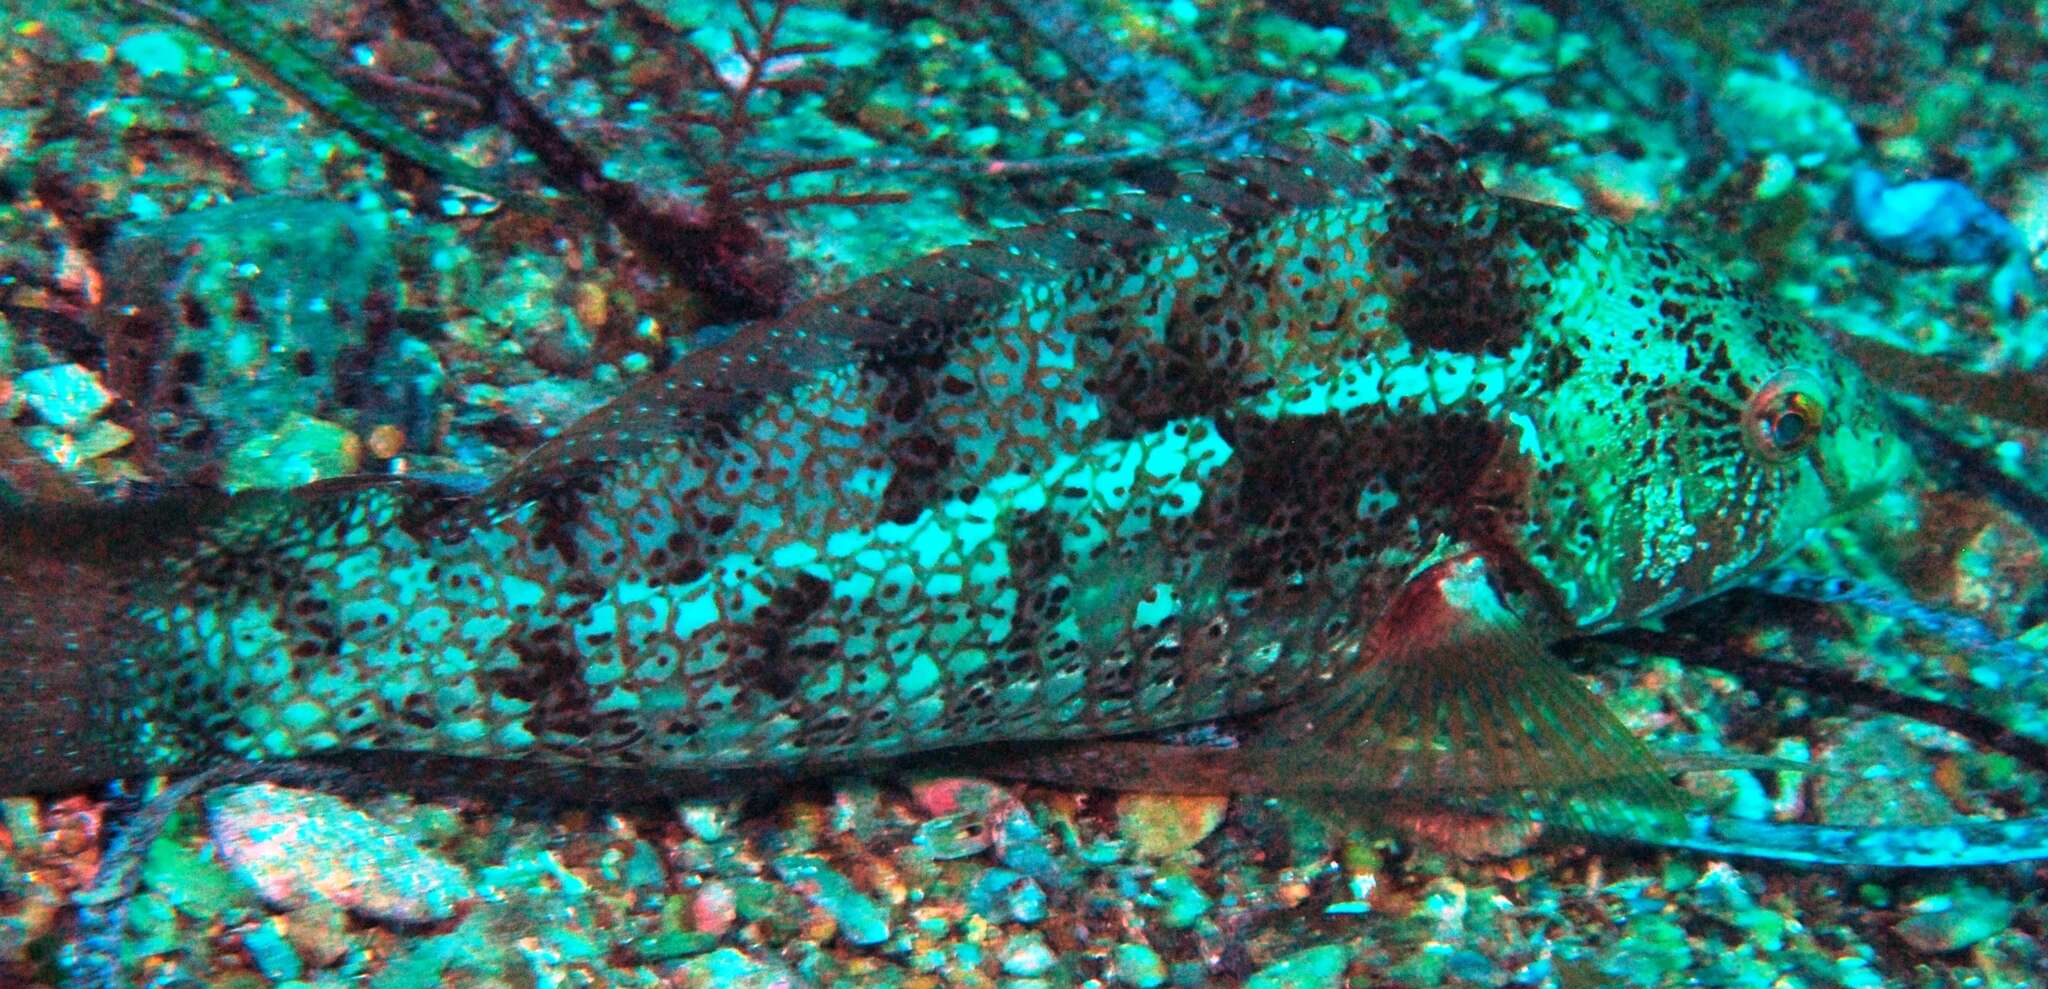 Image of Brown spotted wrasse